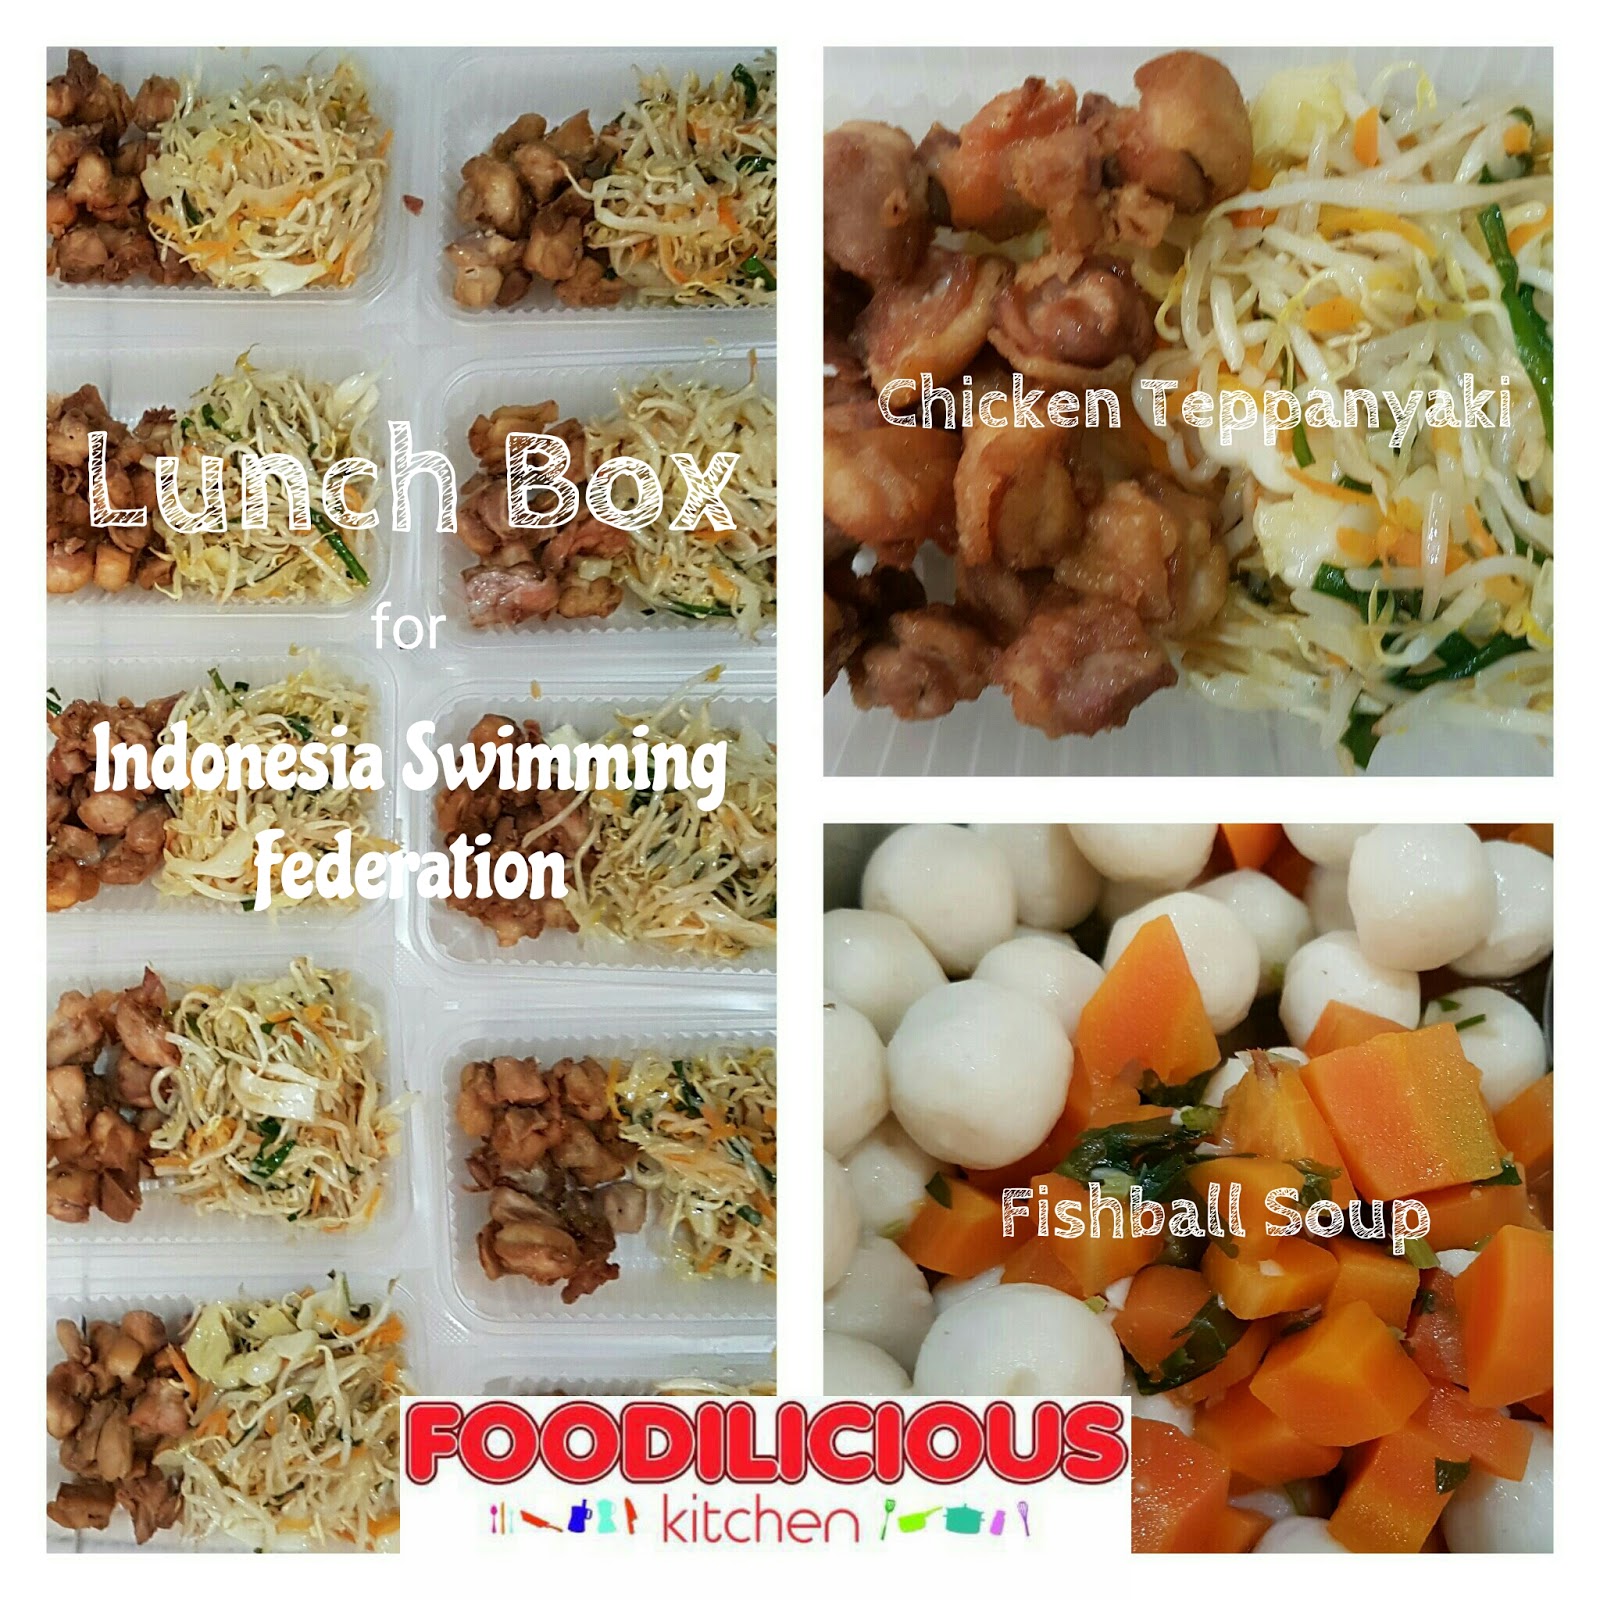 FOODILICIOUS KITCHEN SHAH ALAM: LUNCH AND DINNER BOX FOR INDONESIA